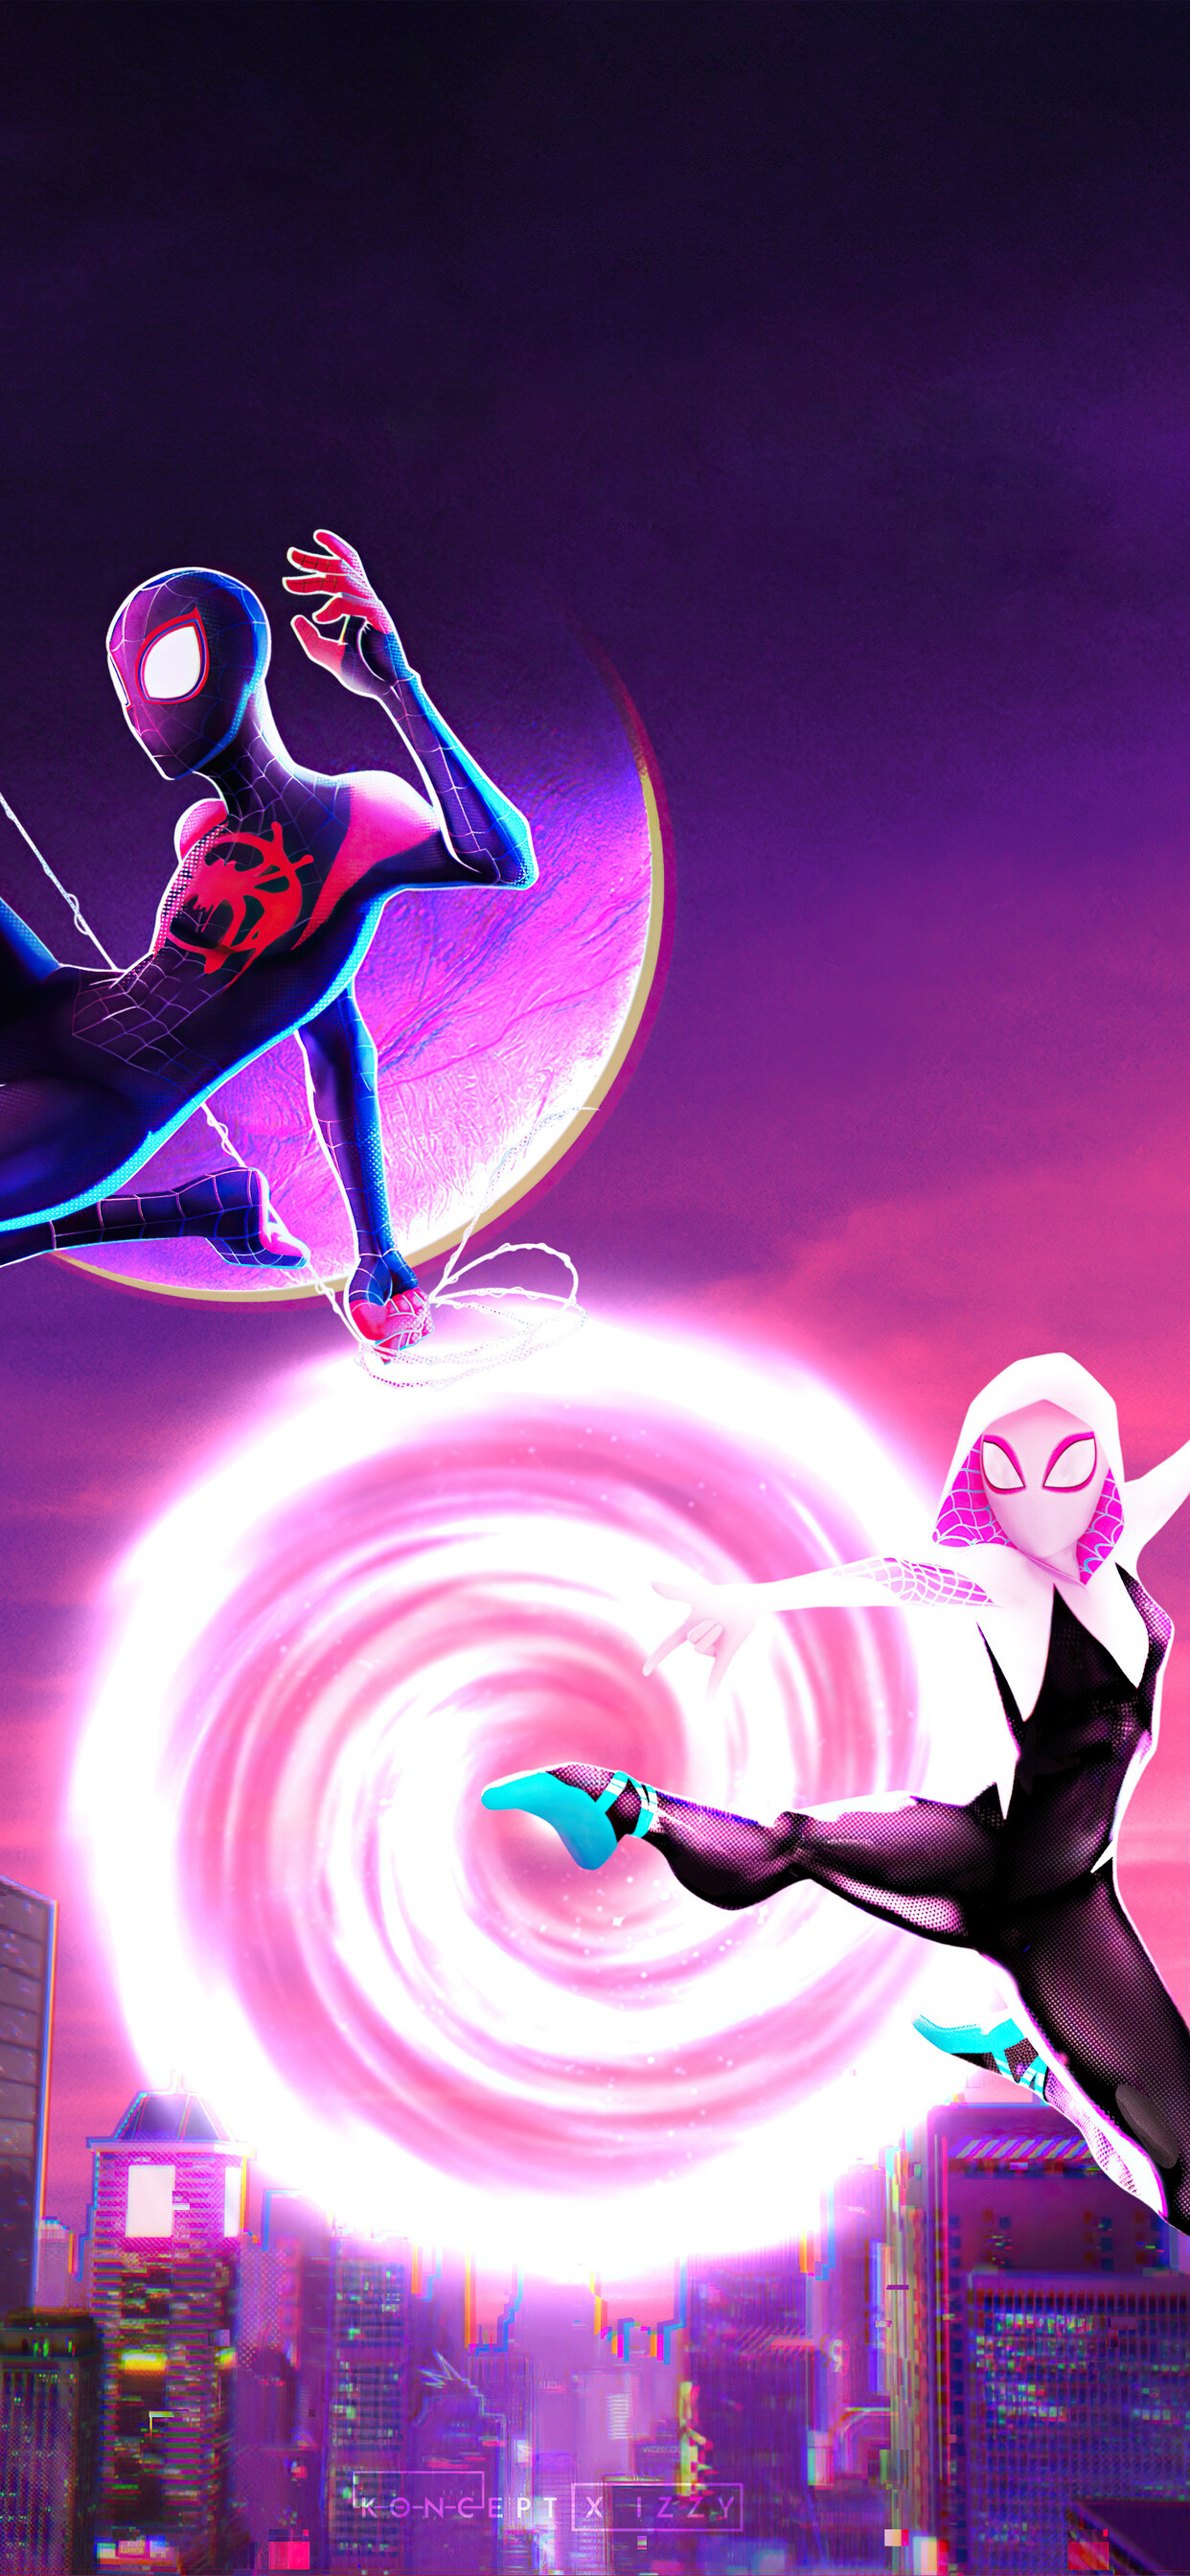 Gwen Stacy: Hailee Steinfeld voices the character in the Spider-Verse film series. 1250x2690 HD Background.